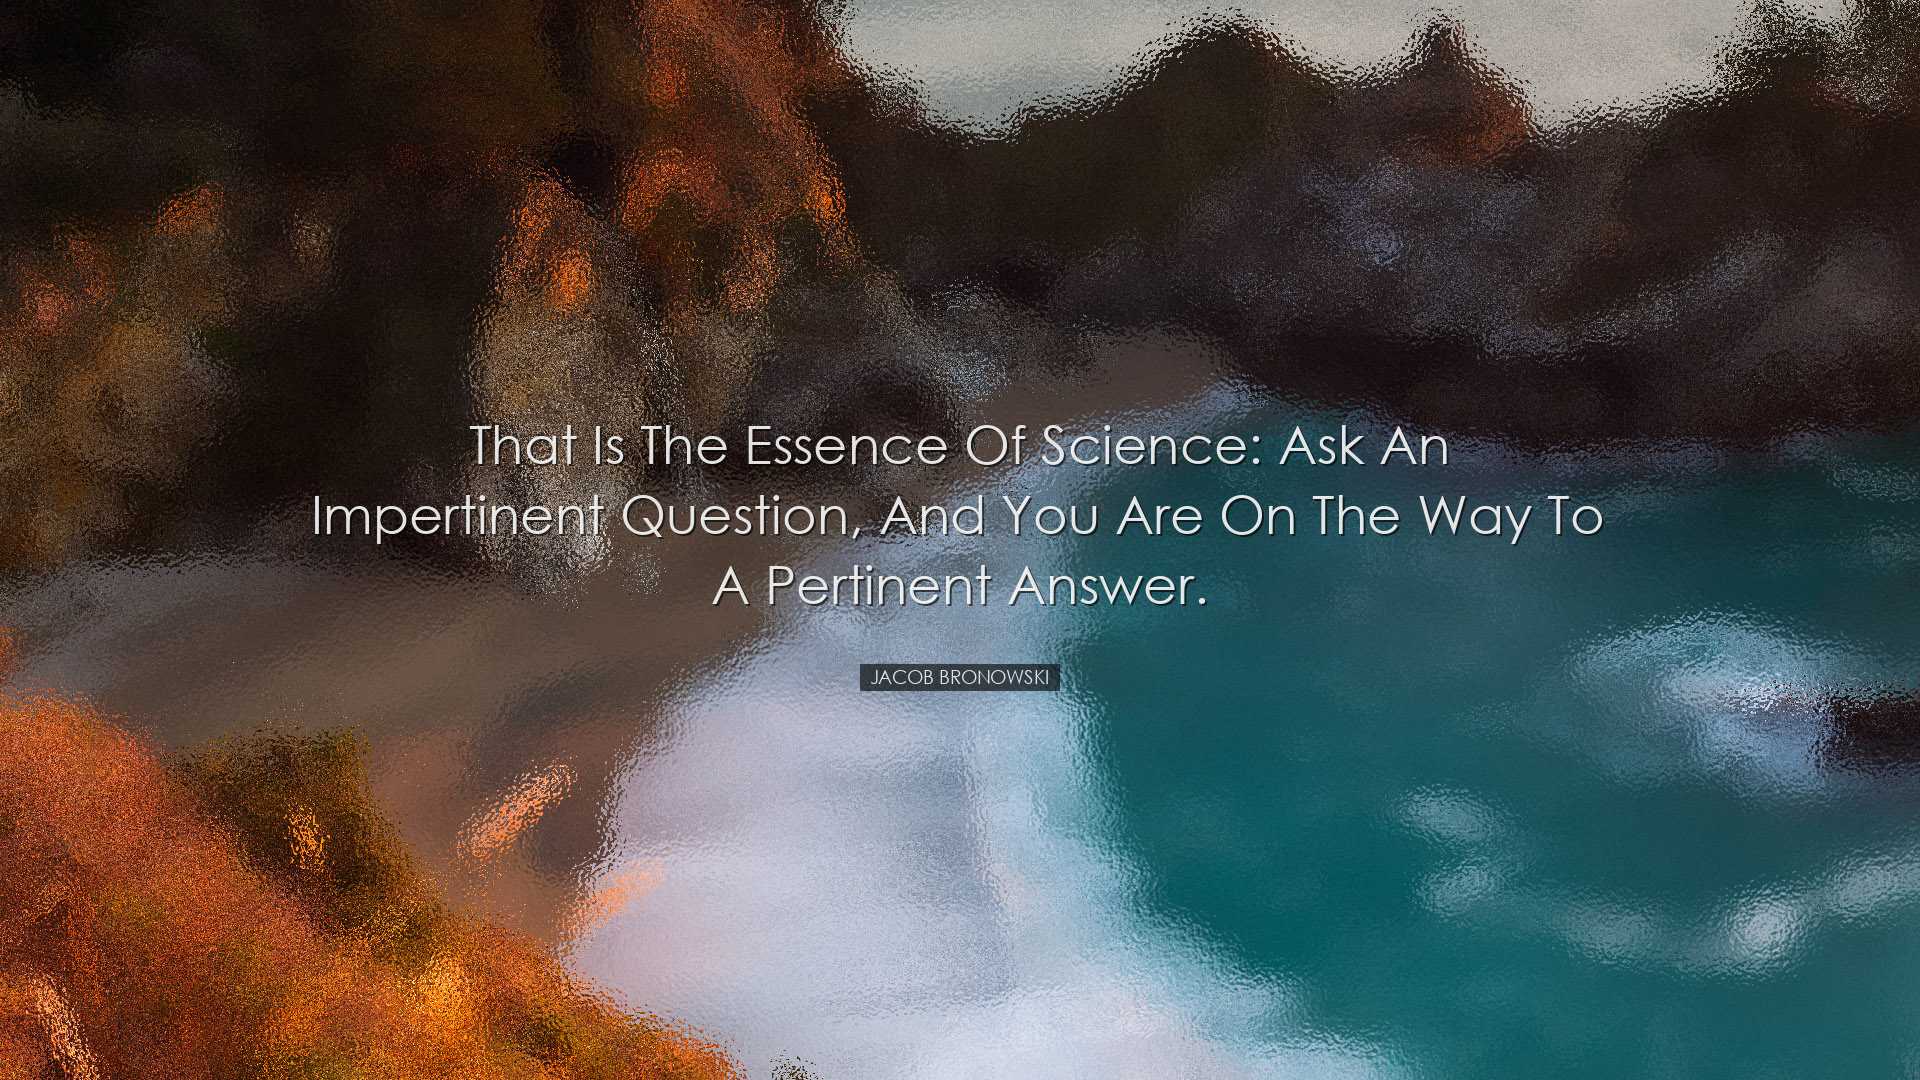 That is the essence of science: ask an impertinent question, and y